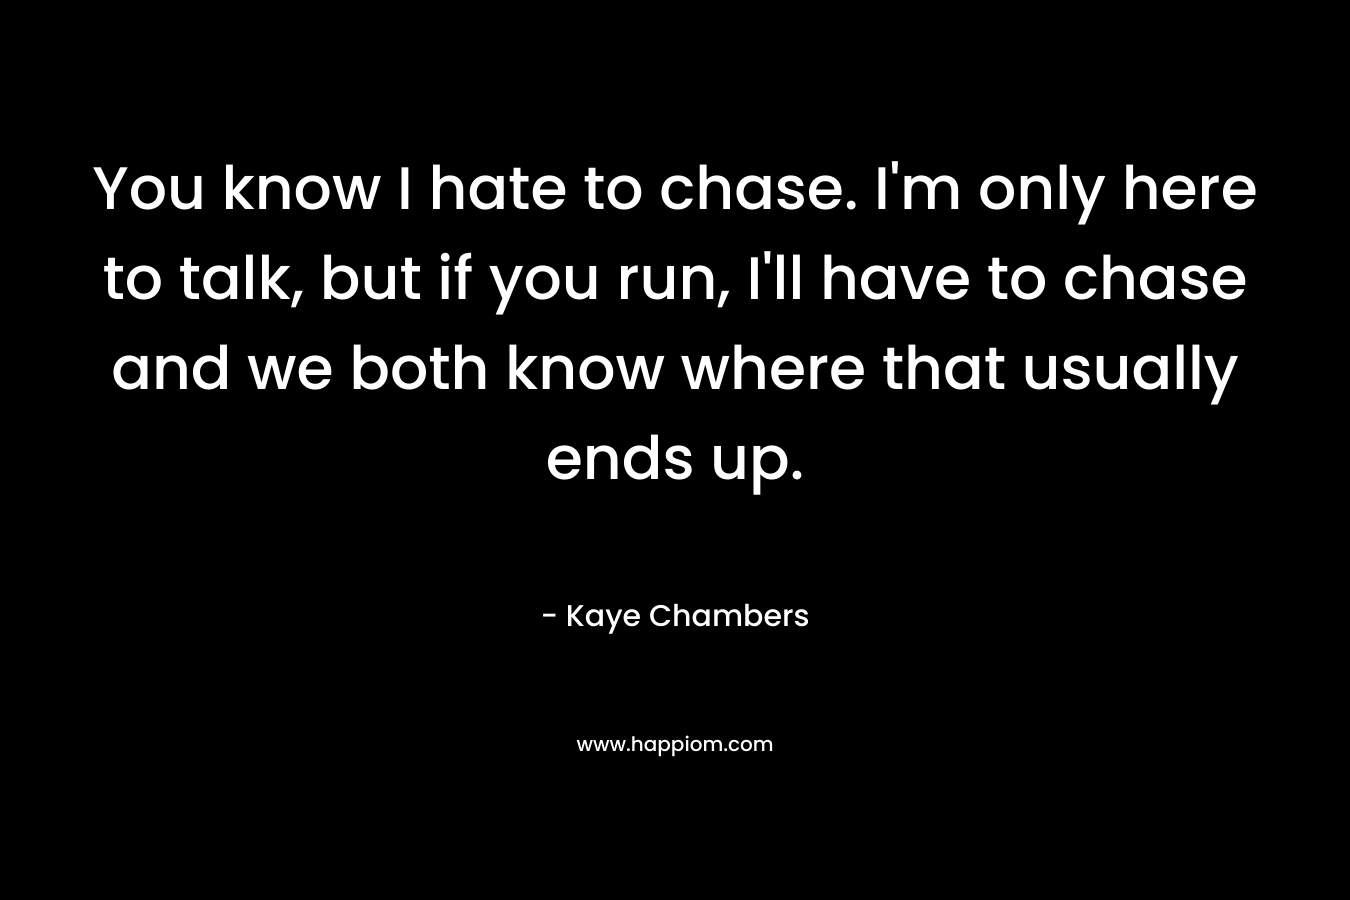 You know I hate to chase. I'm only here to talk, but if you run, I'll have to chase and we both know where that usually ends up.